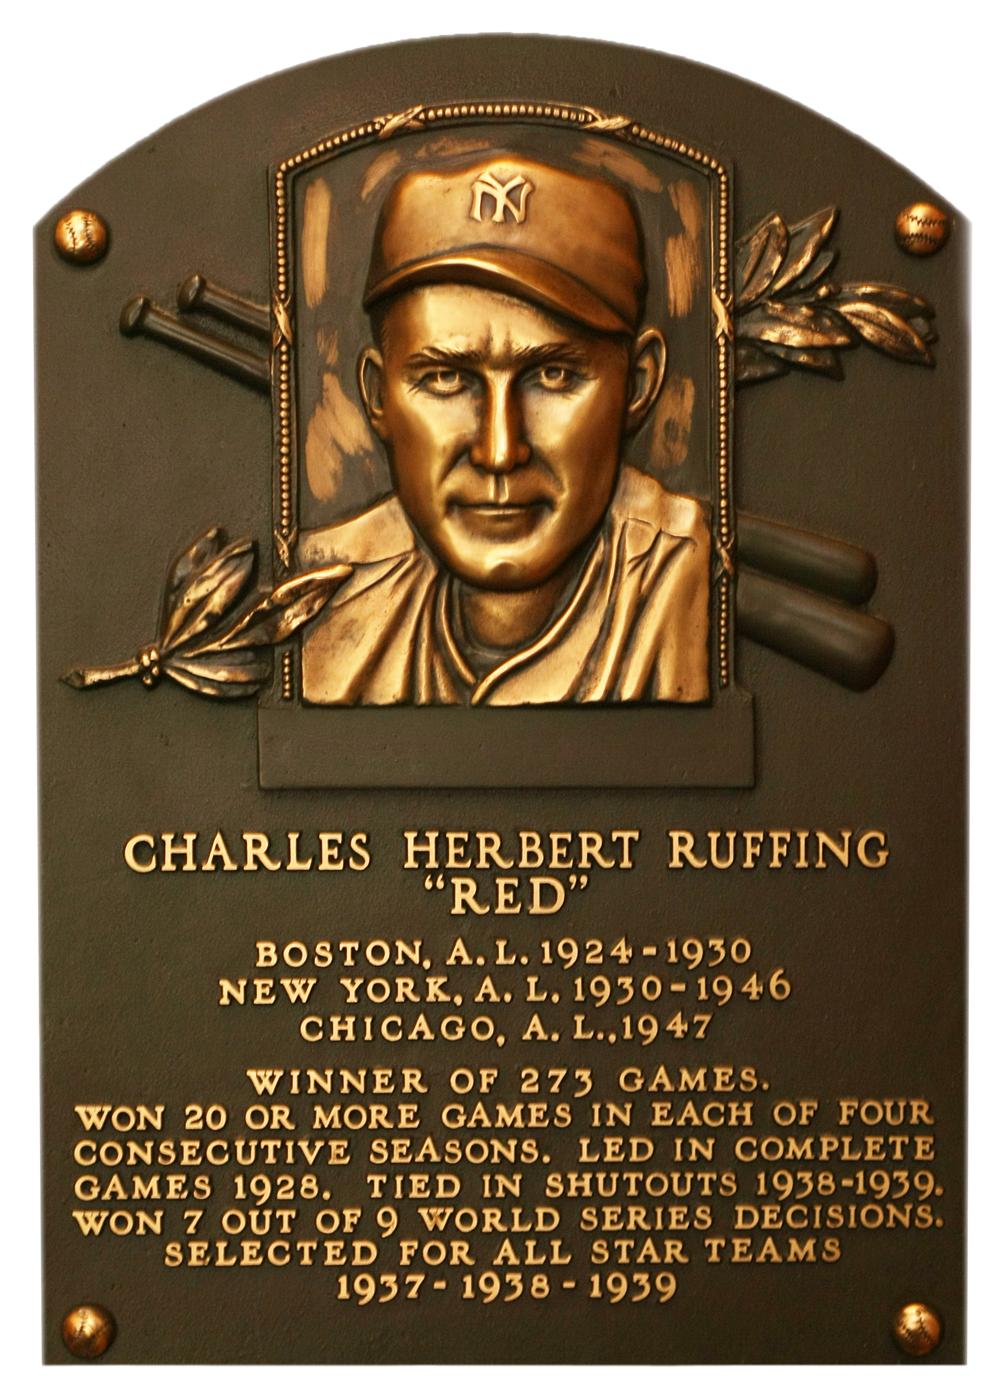 Red Ruffing Hall of Fame plaque